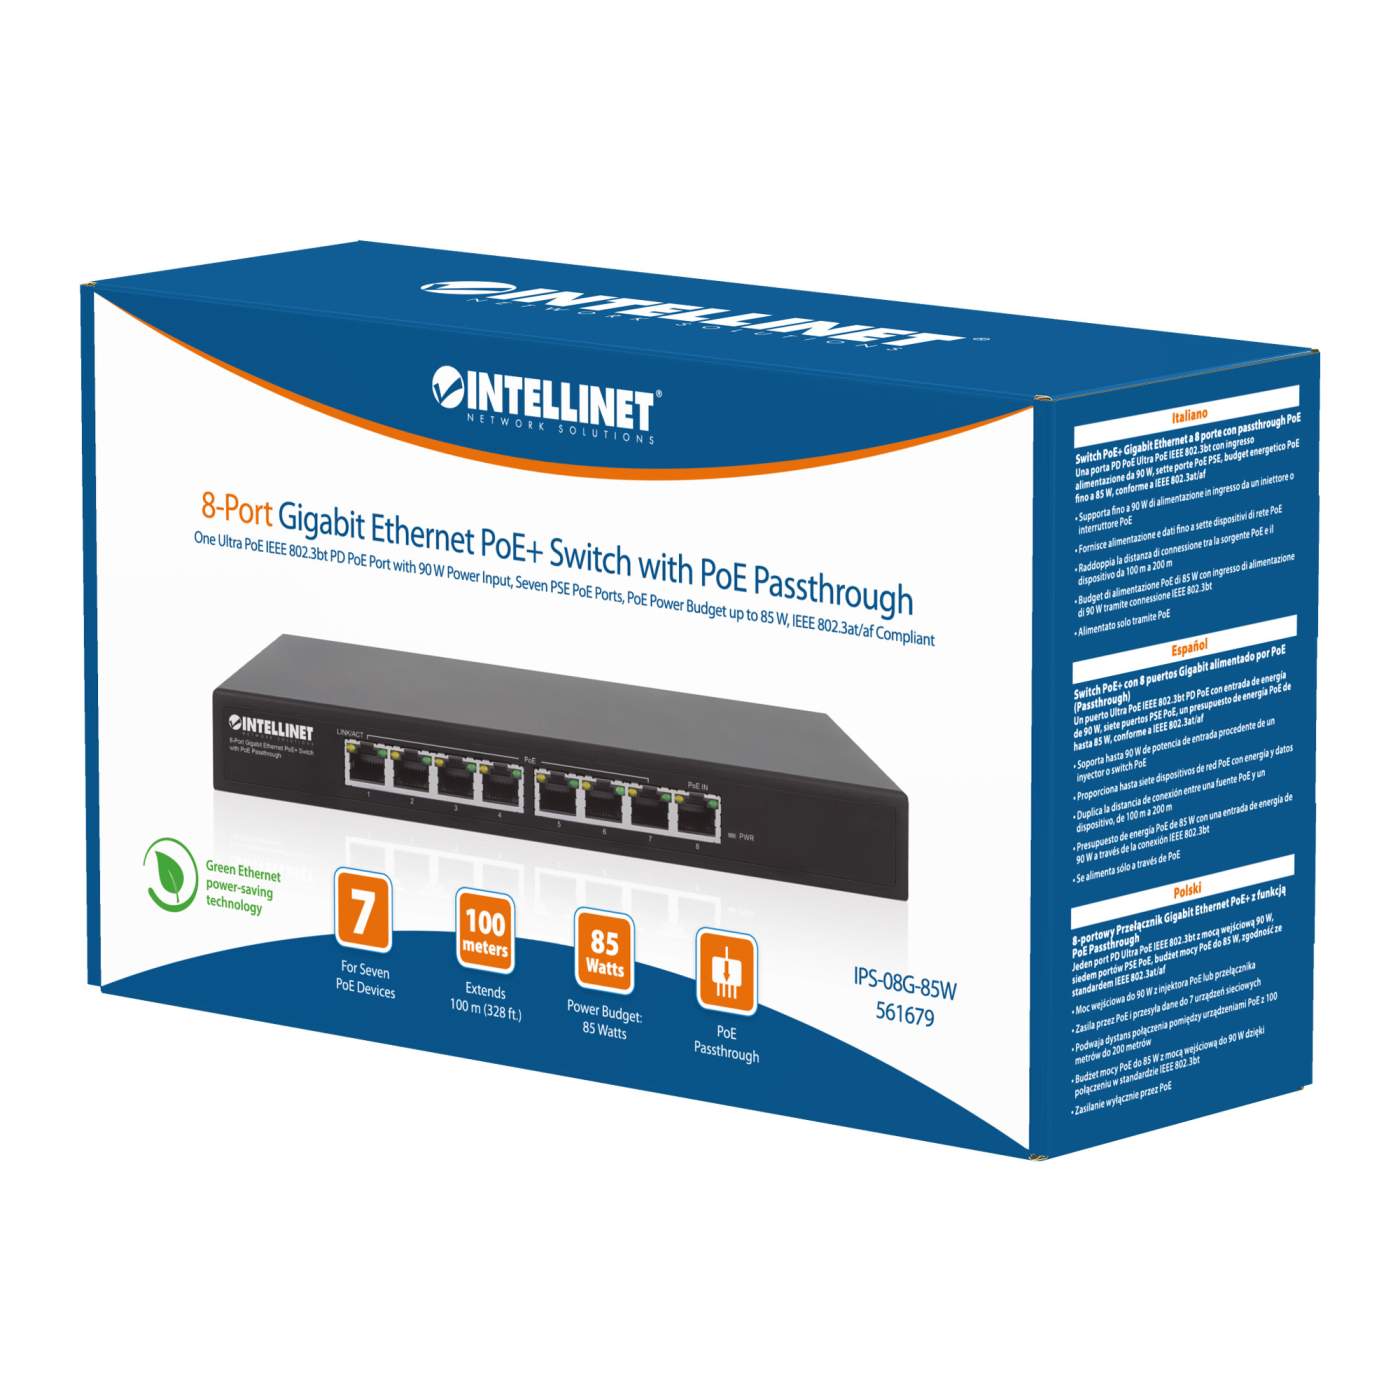 PoE-Powered 8-Port Gigabit Ethernet PoE+ Switch with PoE Passthrough